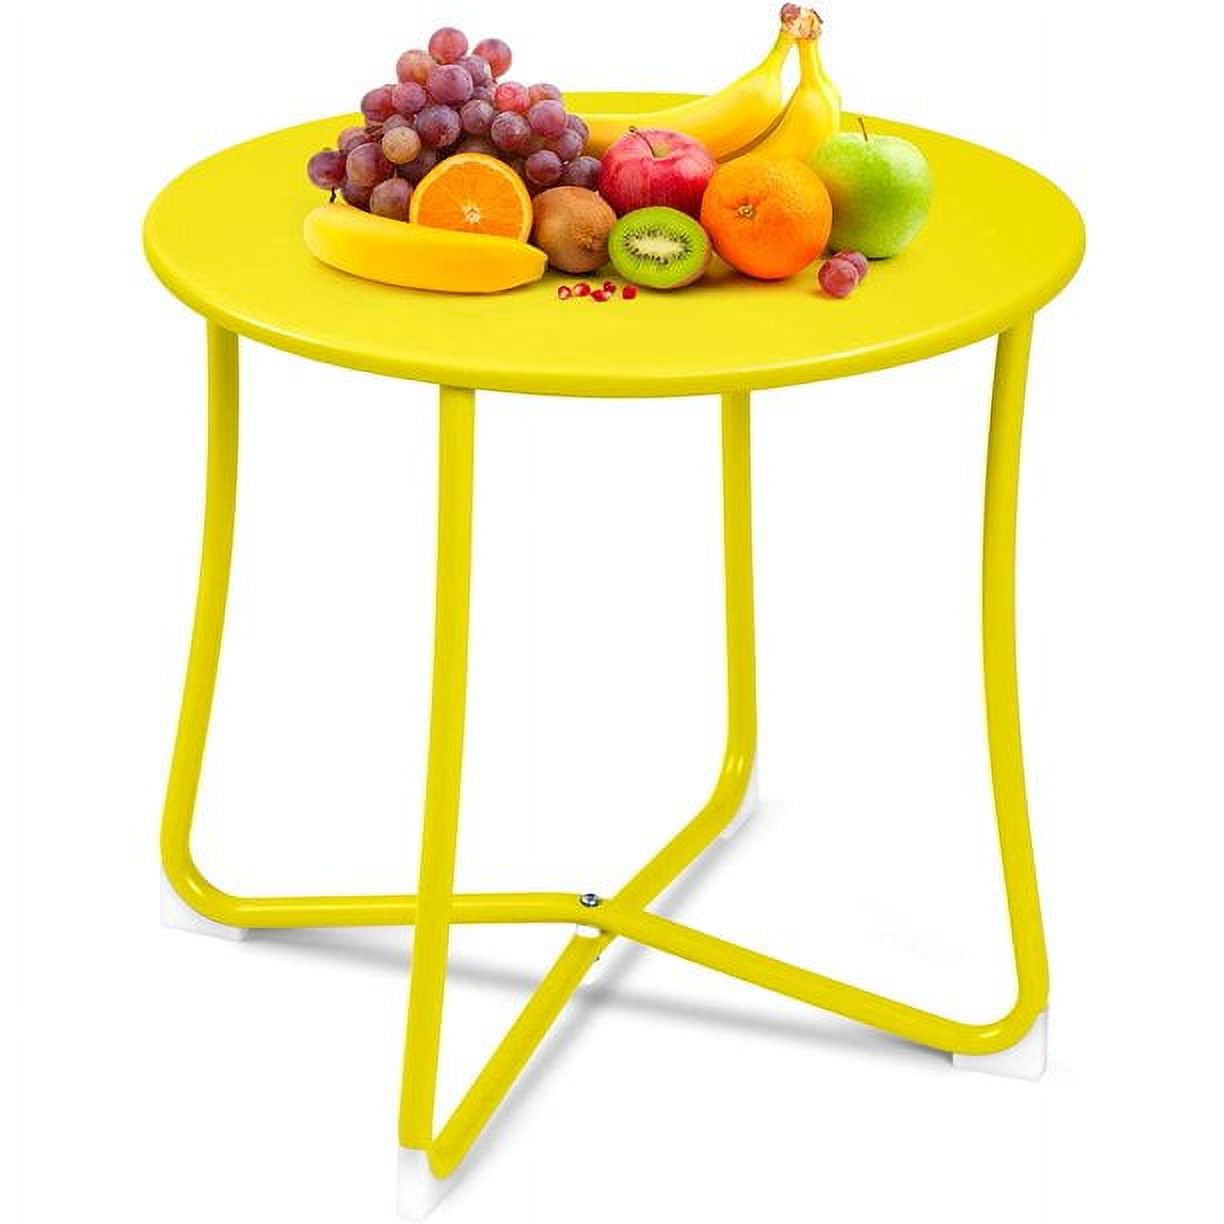 AMAGABELI Metal Patio Side Table 18” x 18” Heavy Duty Weather Resistant Anti-Rust Outdoor End Table Small Steel Round Coffee Table Porch Table Snack Table for Balcony Garden Yard Lawn, Yellow ET091 - image 1 of 8